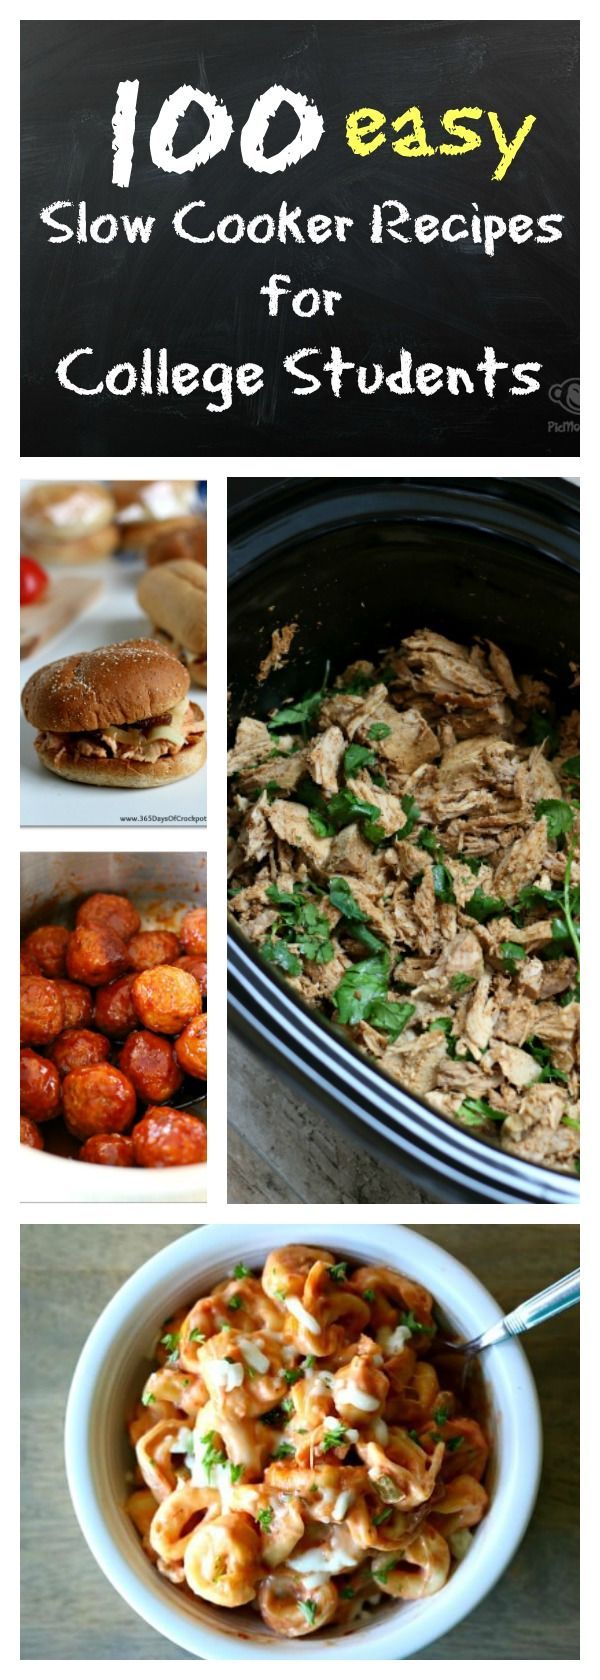 Cheap Student Slow Cooker Recipes